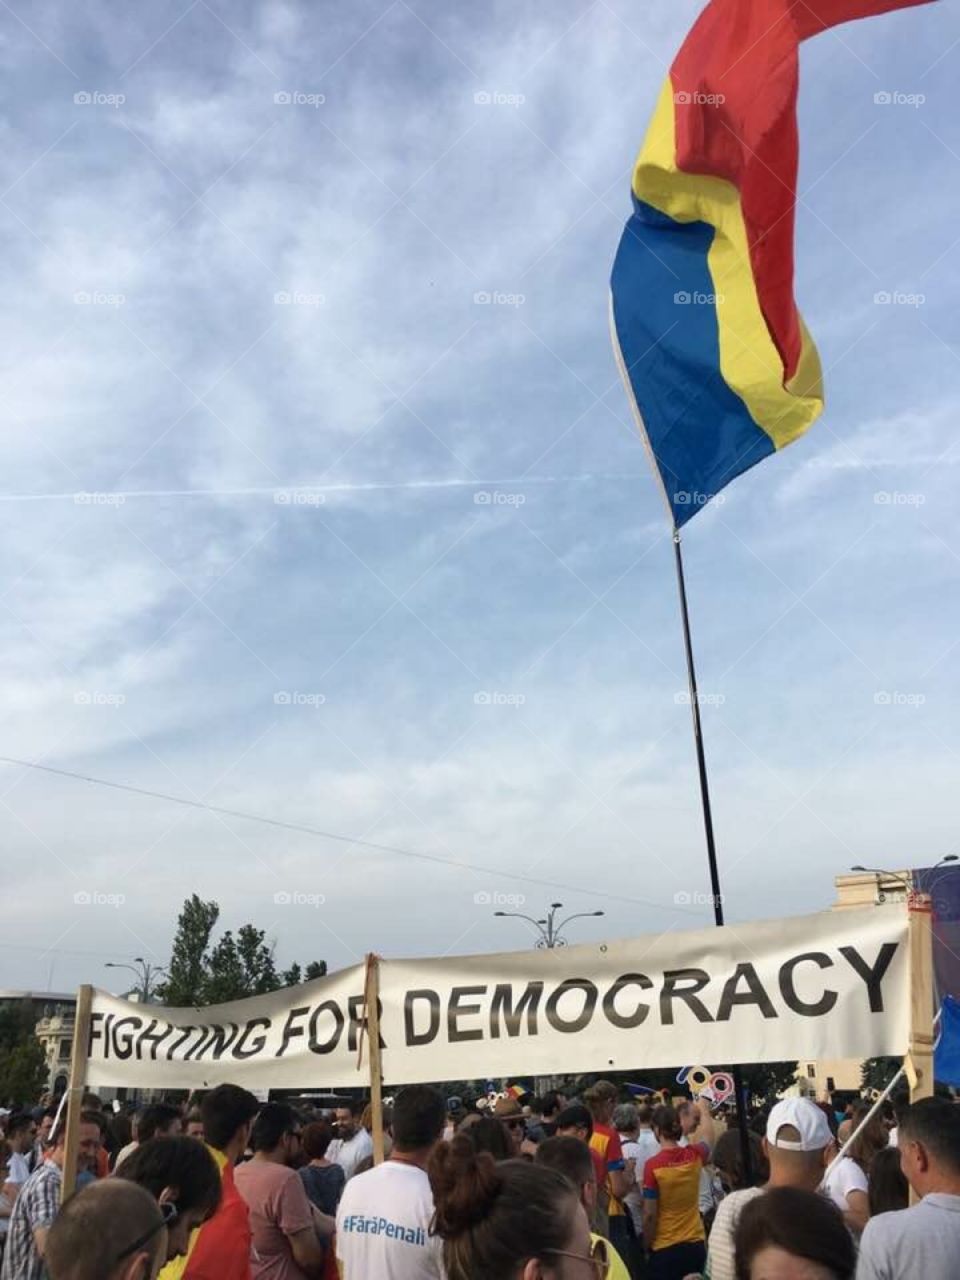 Another day in Romania when we're fighting for democracy! Protests every day, sometimes, they get massive!